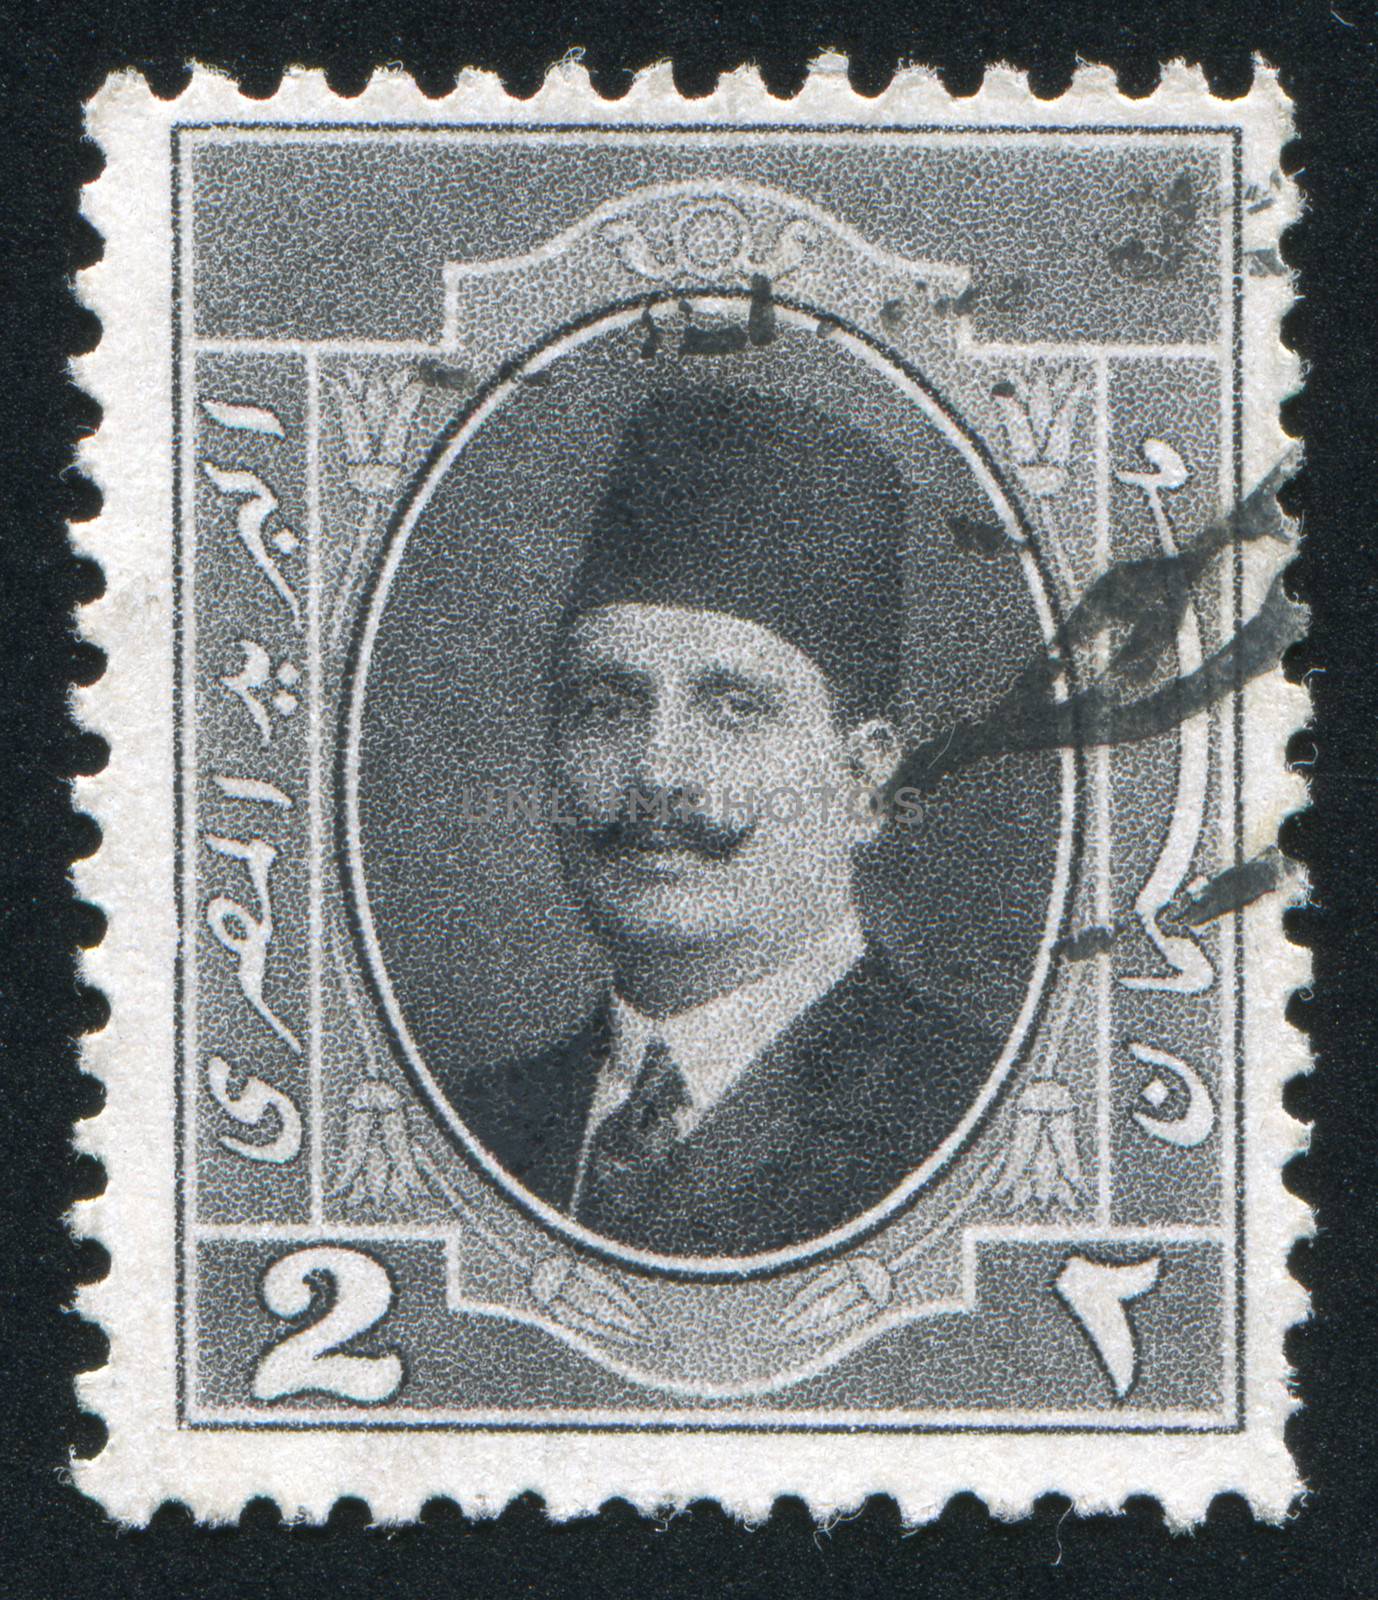 EGYPT - CIRCA 1923: stamp printed by Egypt, shows King Fuad, circa 1923.